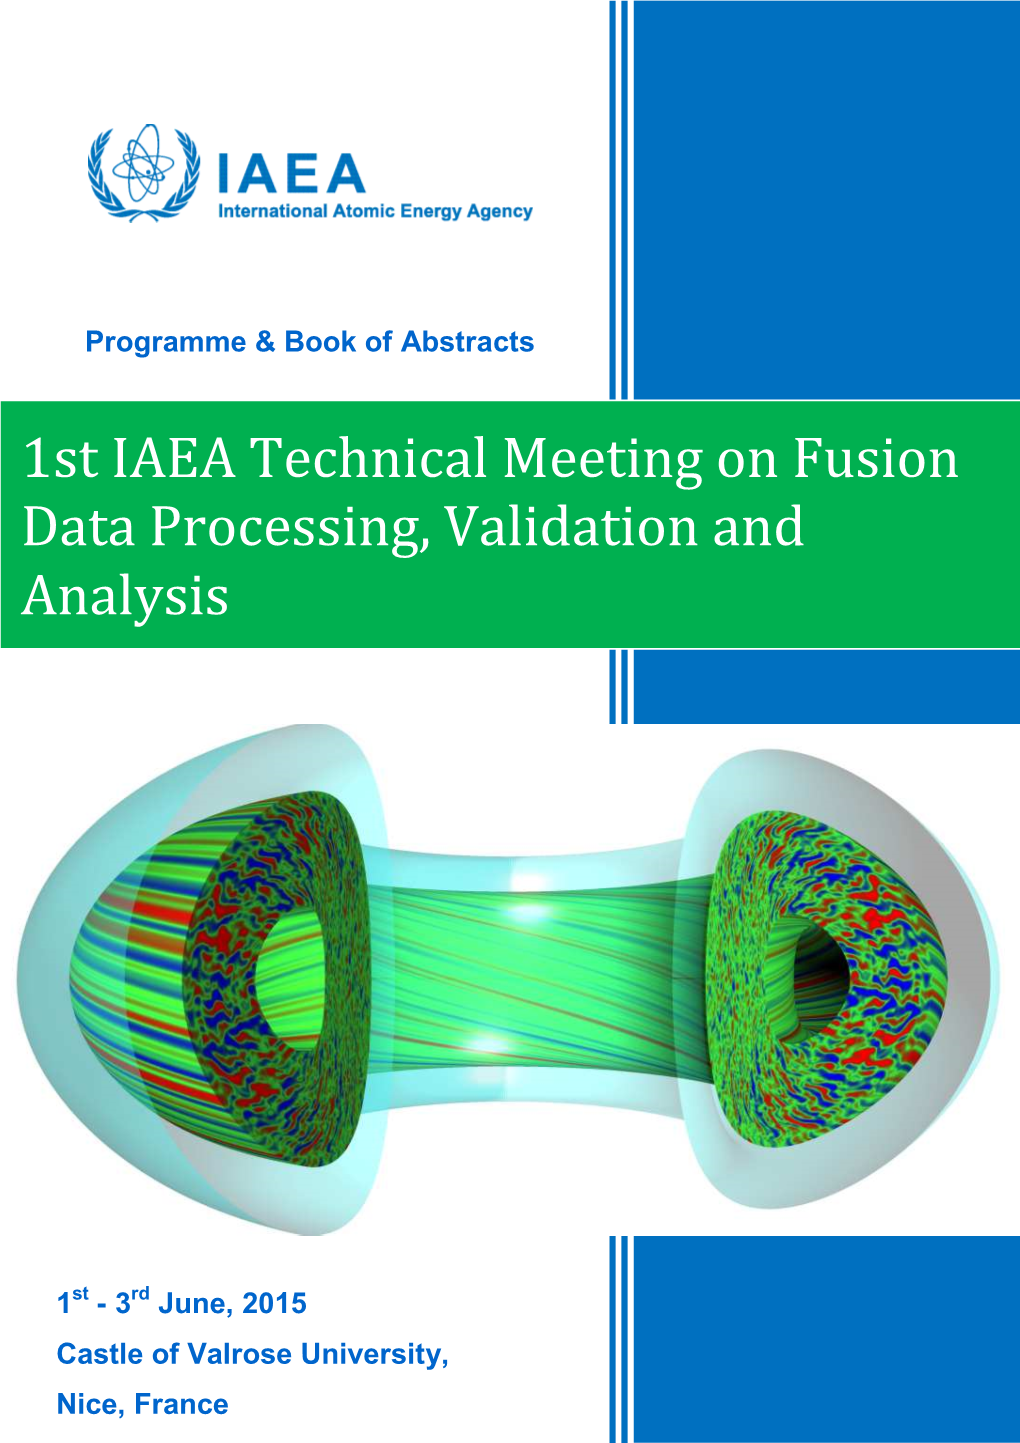 1St IAEA Technical Meeting on Fusion Data Processing, Validation and Analysis